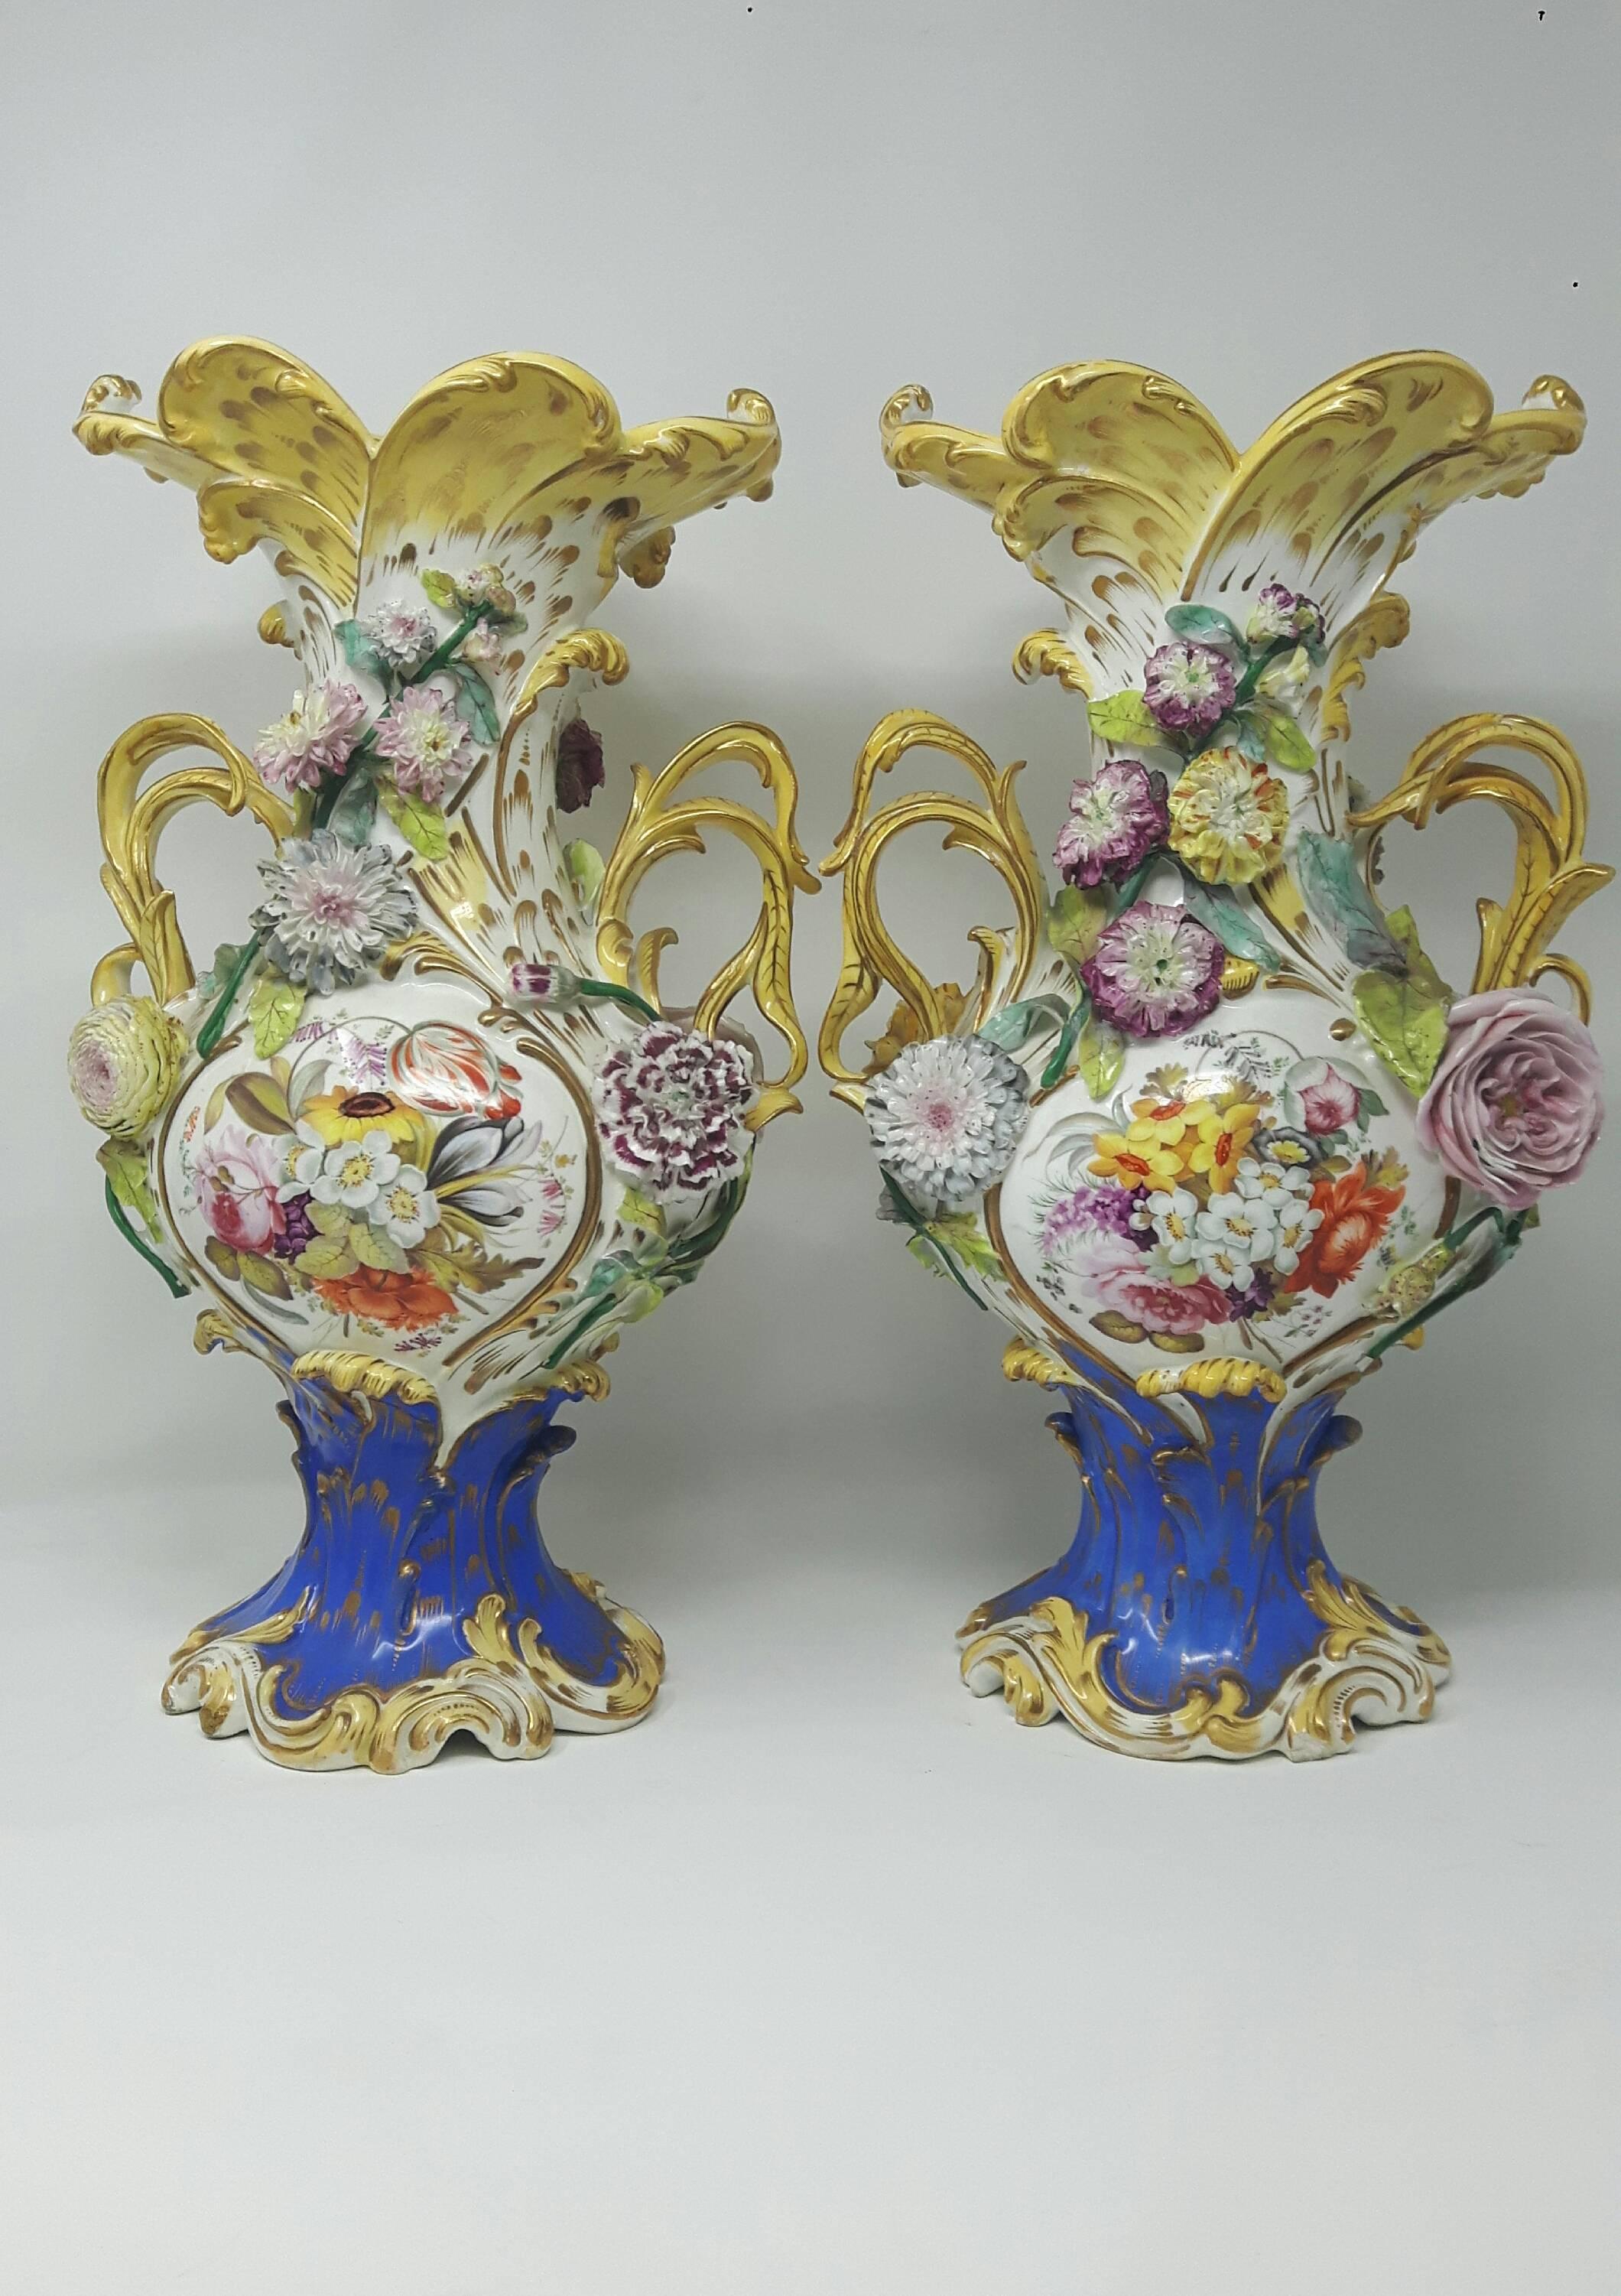 Pair of 19th century Coalport vases encrusted with finely modeled flowers and branches.